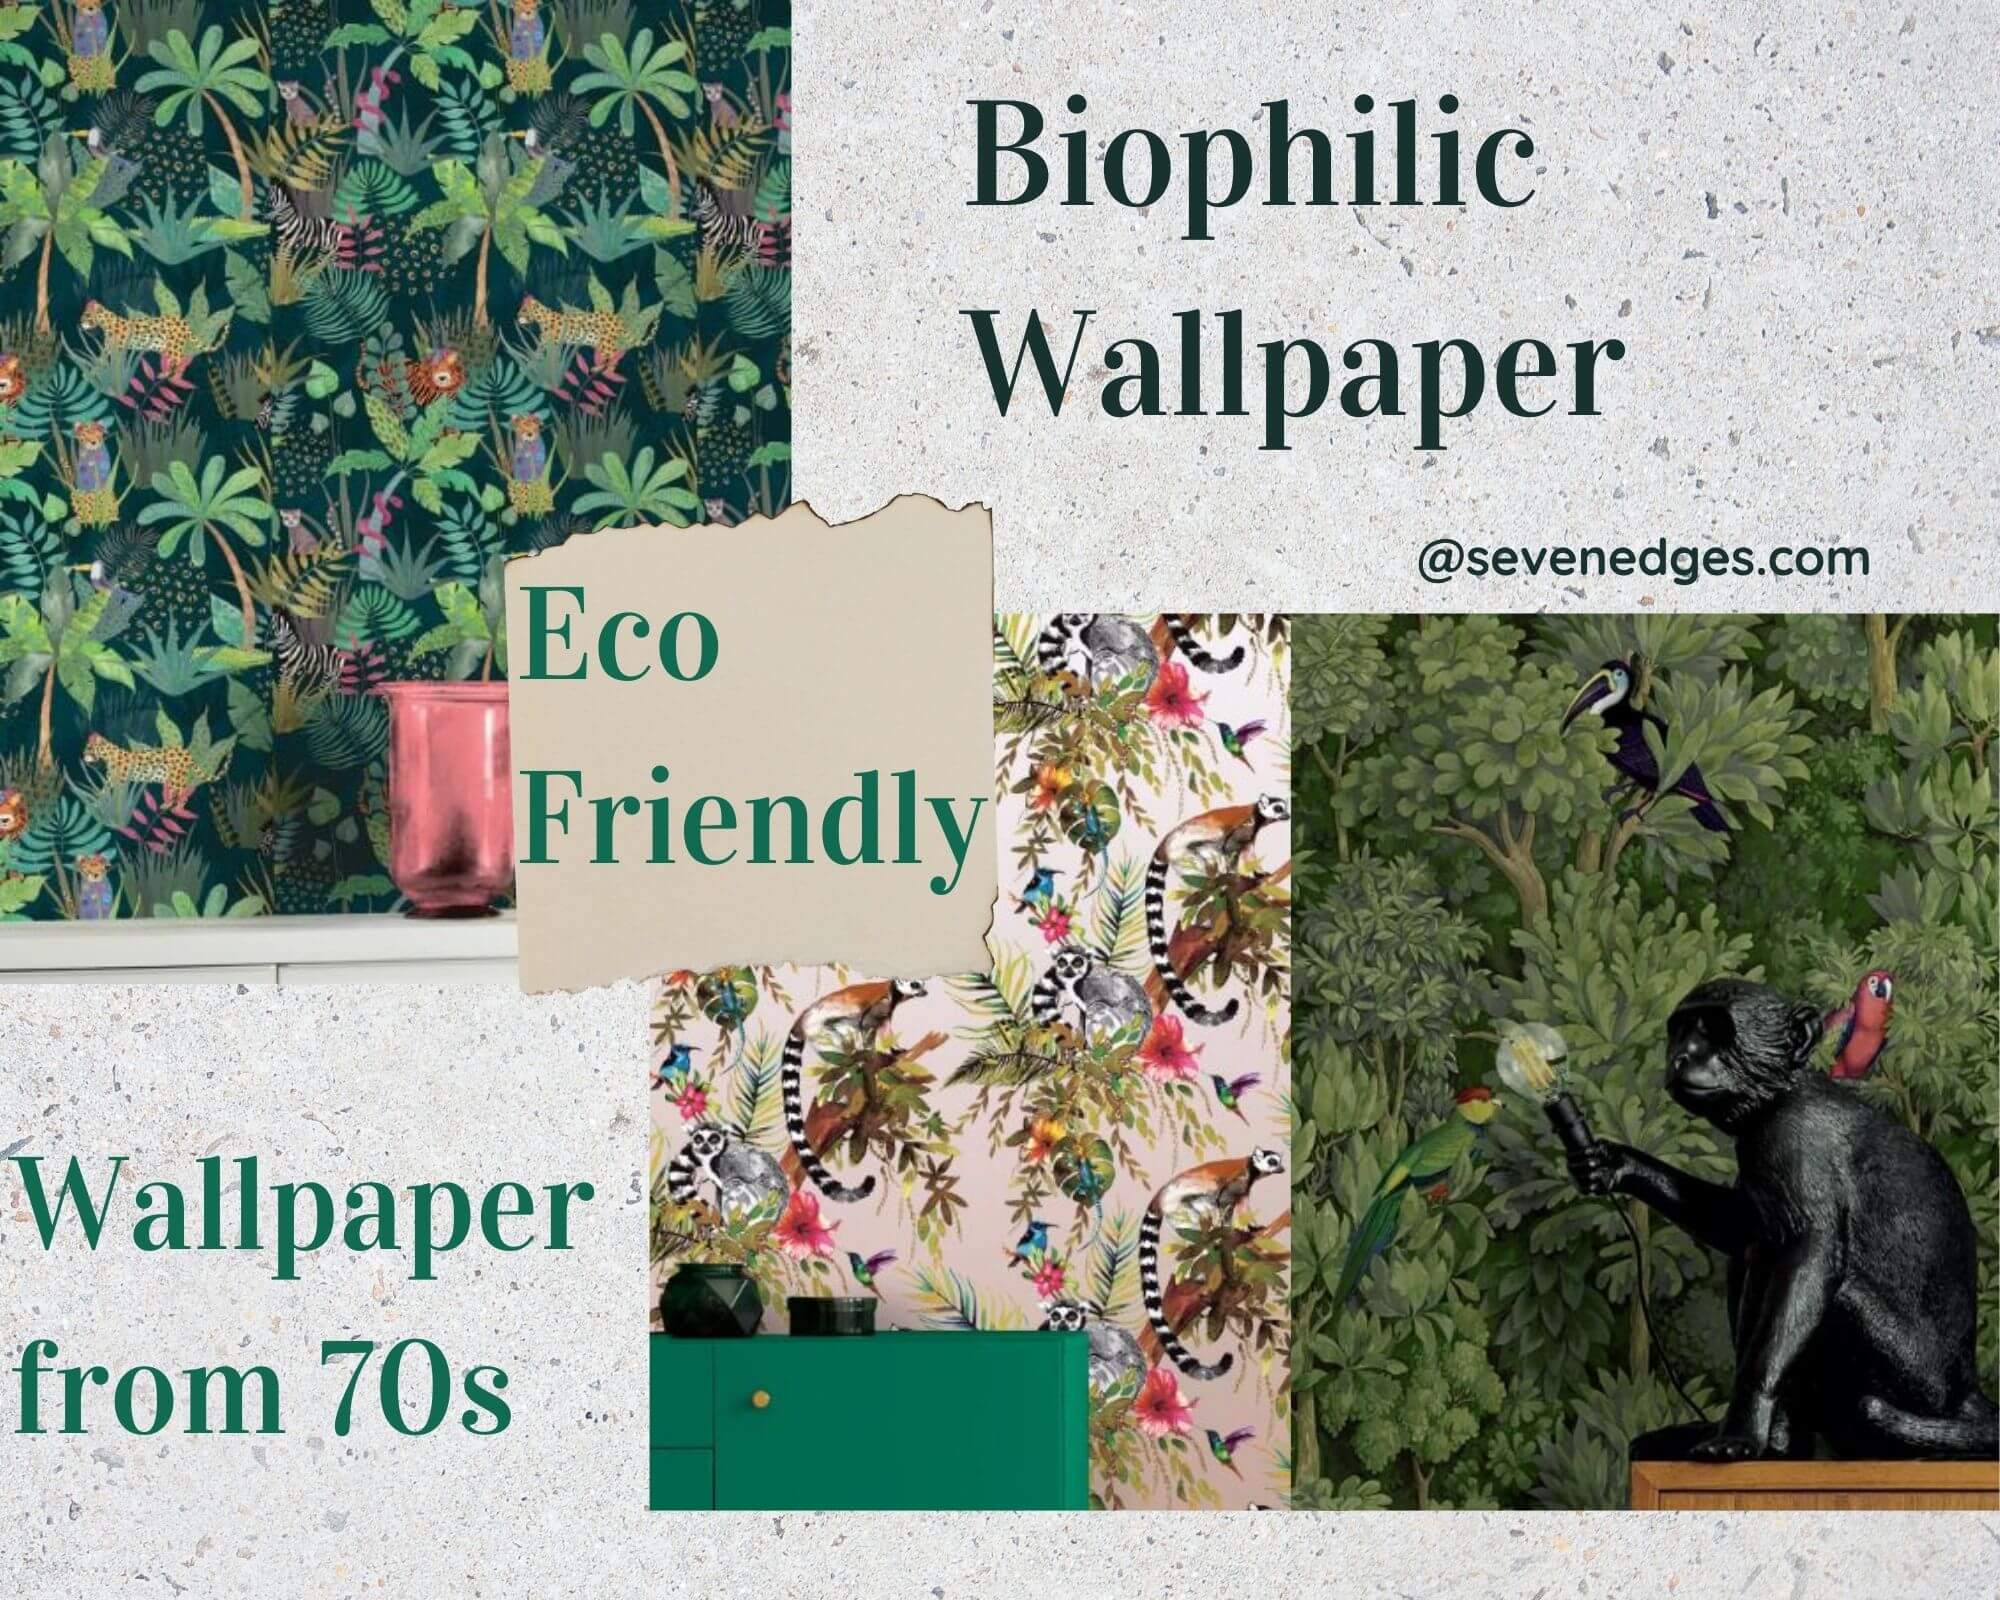 Bophilic Wallpaper from 70s